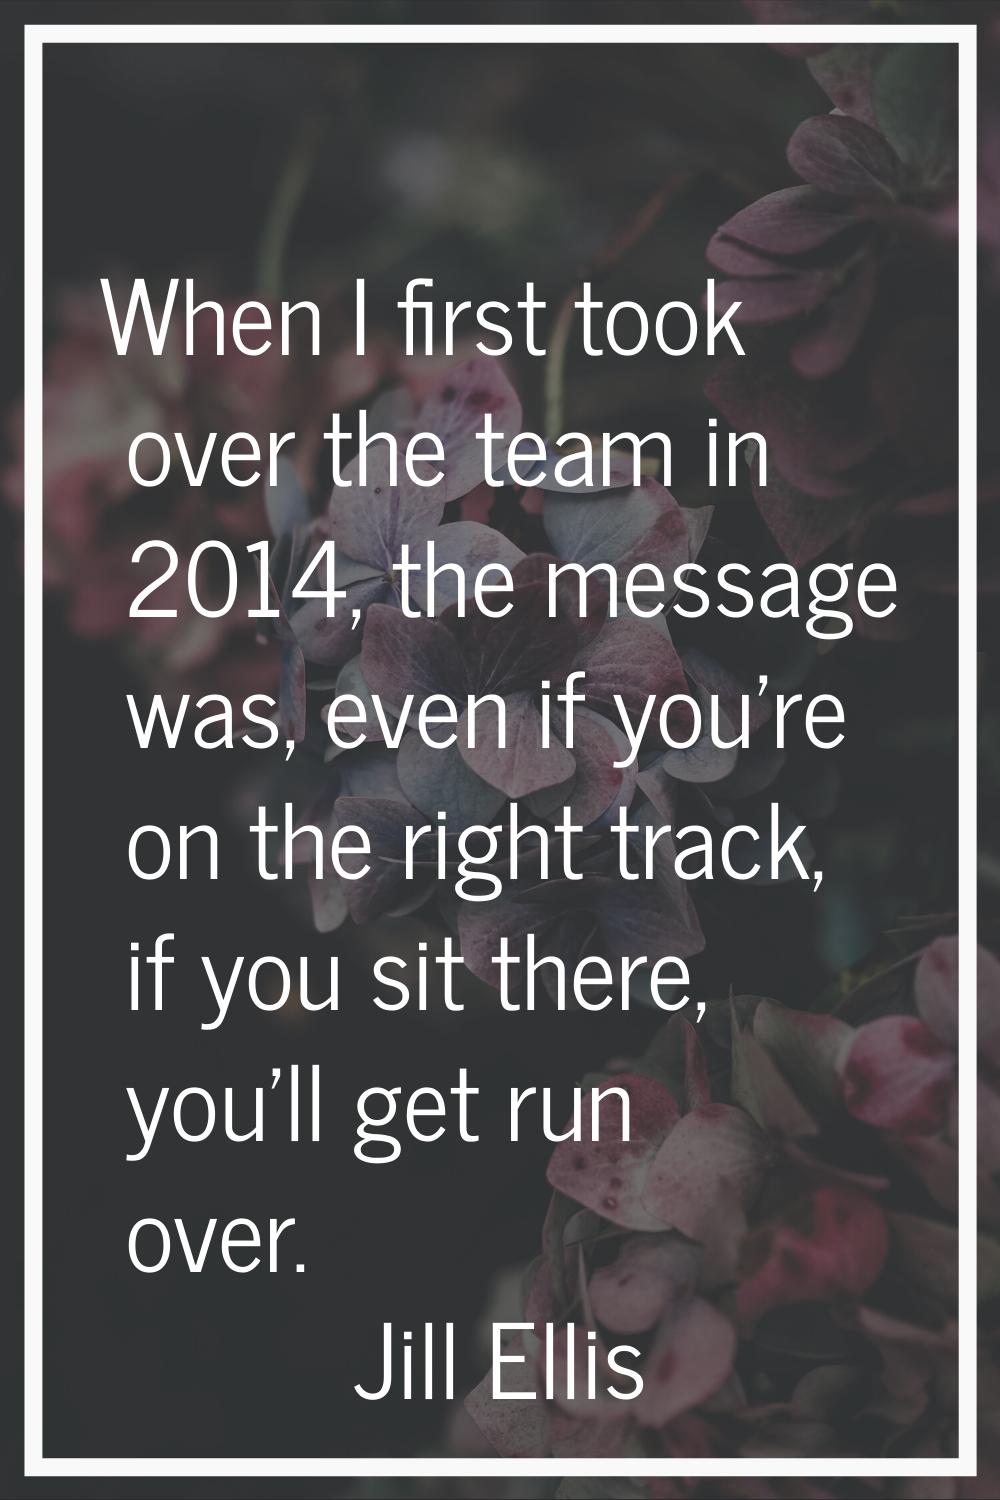 When I first took over the team in 2014, the message was, even if you're on the right track, if you